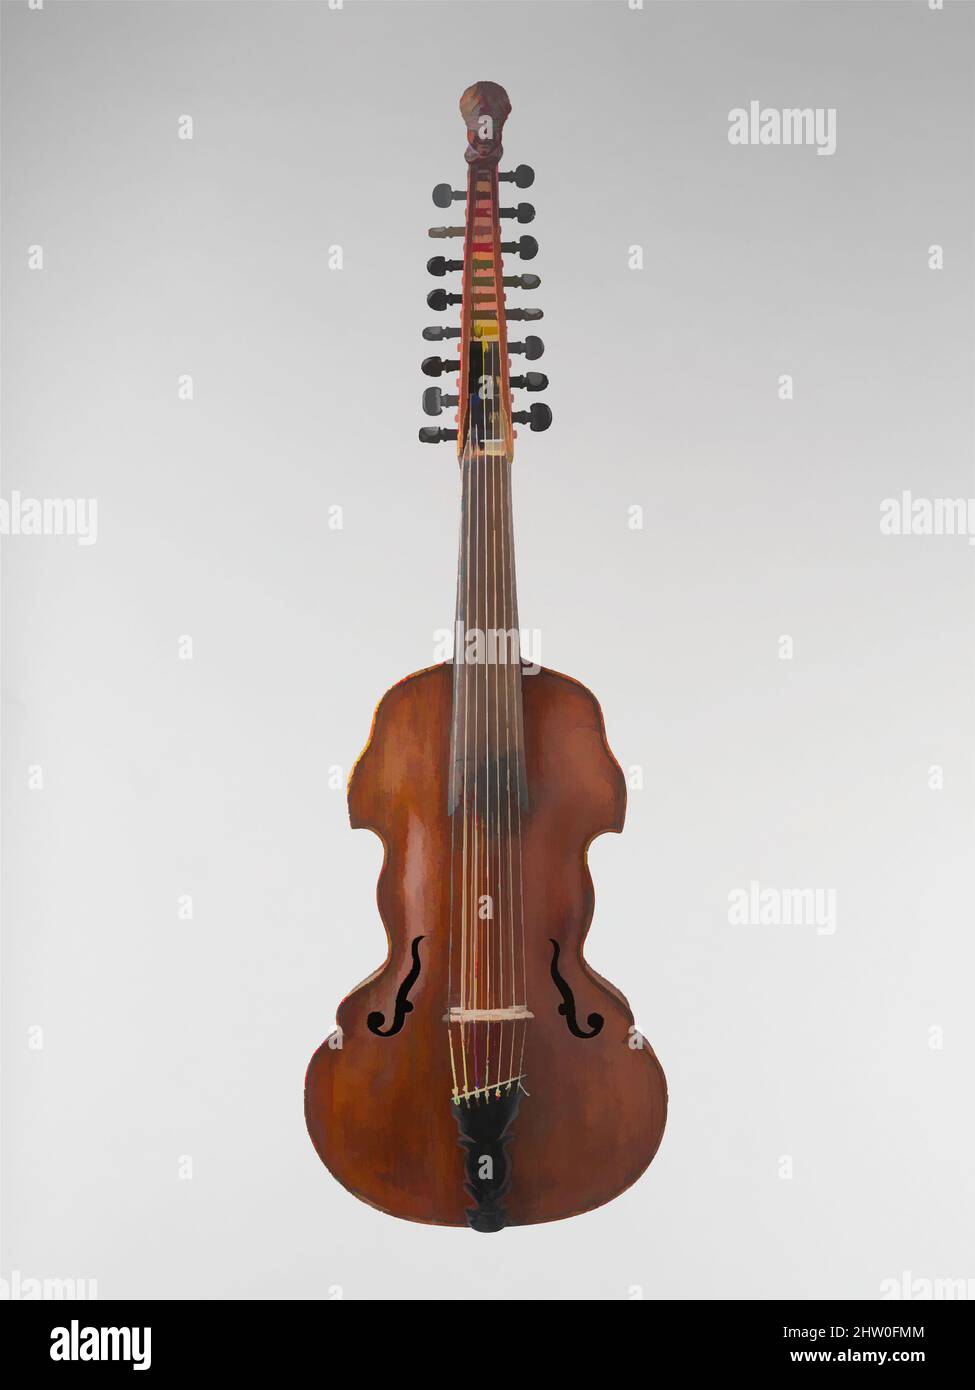 Art inspired by Viola d'Amore, 1726, Munich, Germany, German, Spruce, maple, L. 86.5 cm (33-15/16 in.); Body L. 42.9 cm (16-7/8 in.); Bowed string L. 40.9 cm (16-1/16 in.), Chordophone-Lute-bowed-unfretted, Paulus Alletsee (German, active Munich ca. 1698, died ca. 1738 Munich), Viola d, Classic works modernized by Artotop with a splash of modernity. Shapes, color and value, eye-catching visual impact on art. Emotions through freedom of artworks in a contemporary way. A timeless message pursuing a wildly creative new direction. Artists turning to the digital medium and creating the Artotop NFT Stock Photo